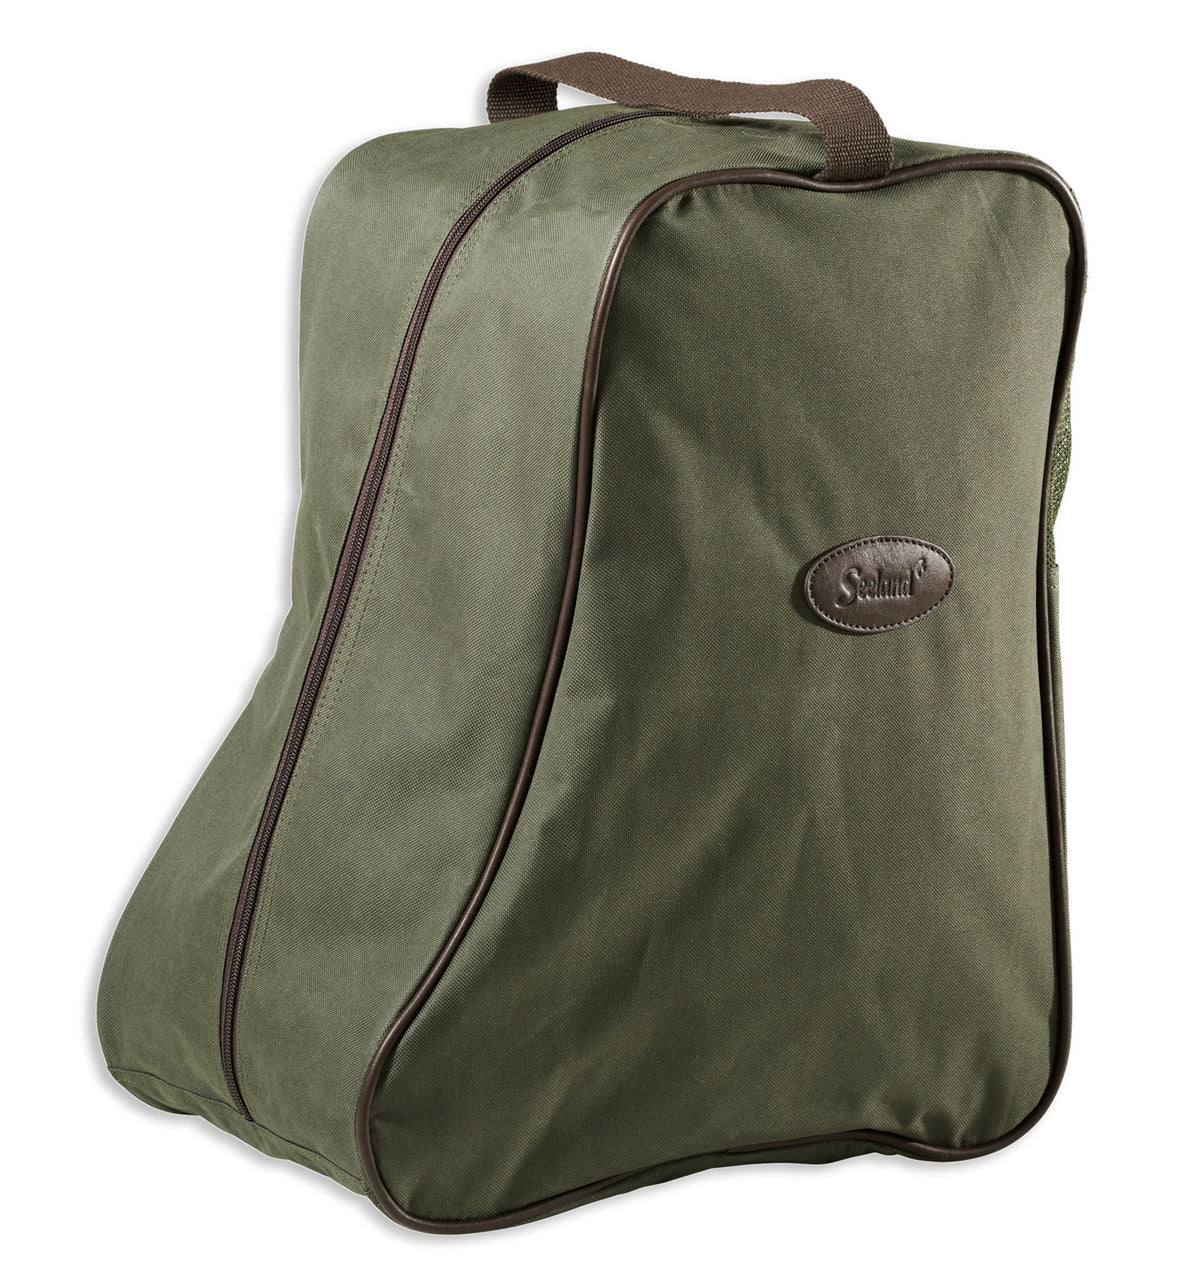 Seeland Boot Bag - Hollands Country Clothing